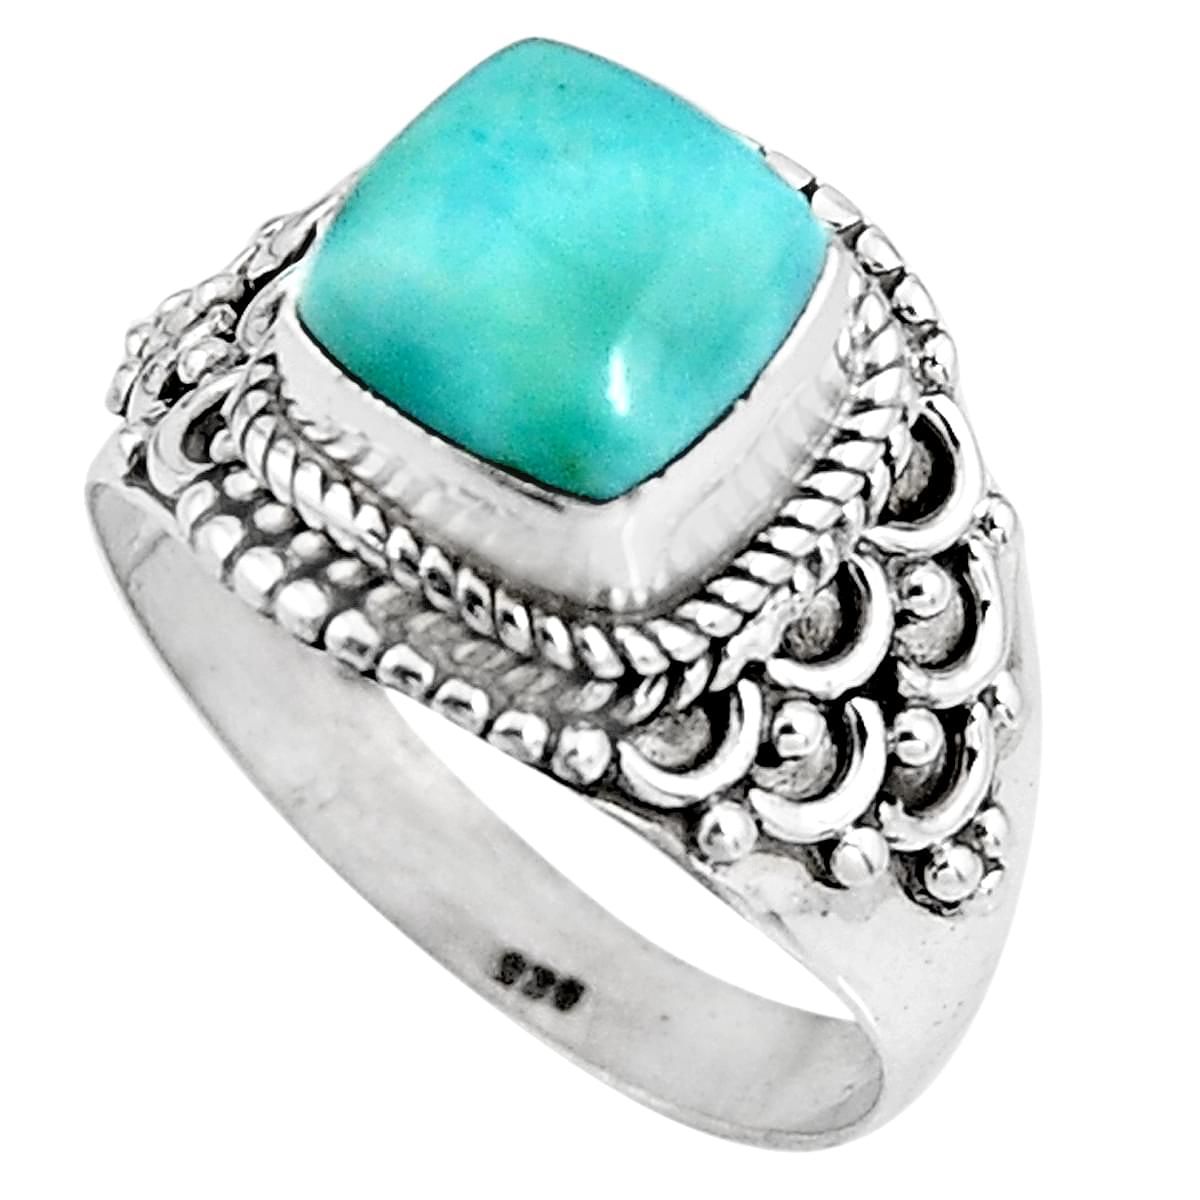 . Silver ring 925 and larimar size 60 size 9 US